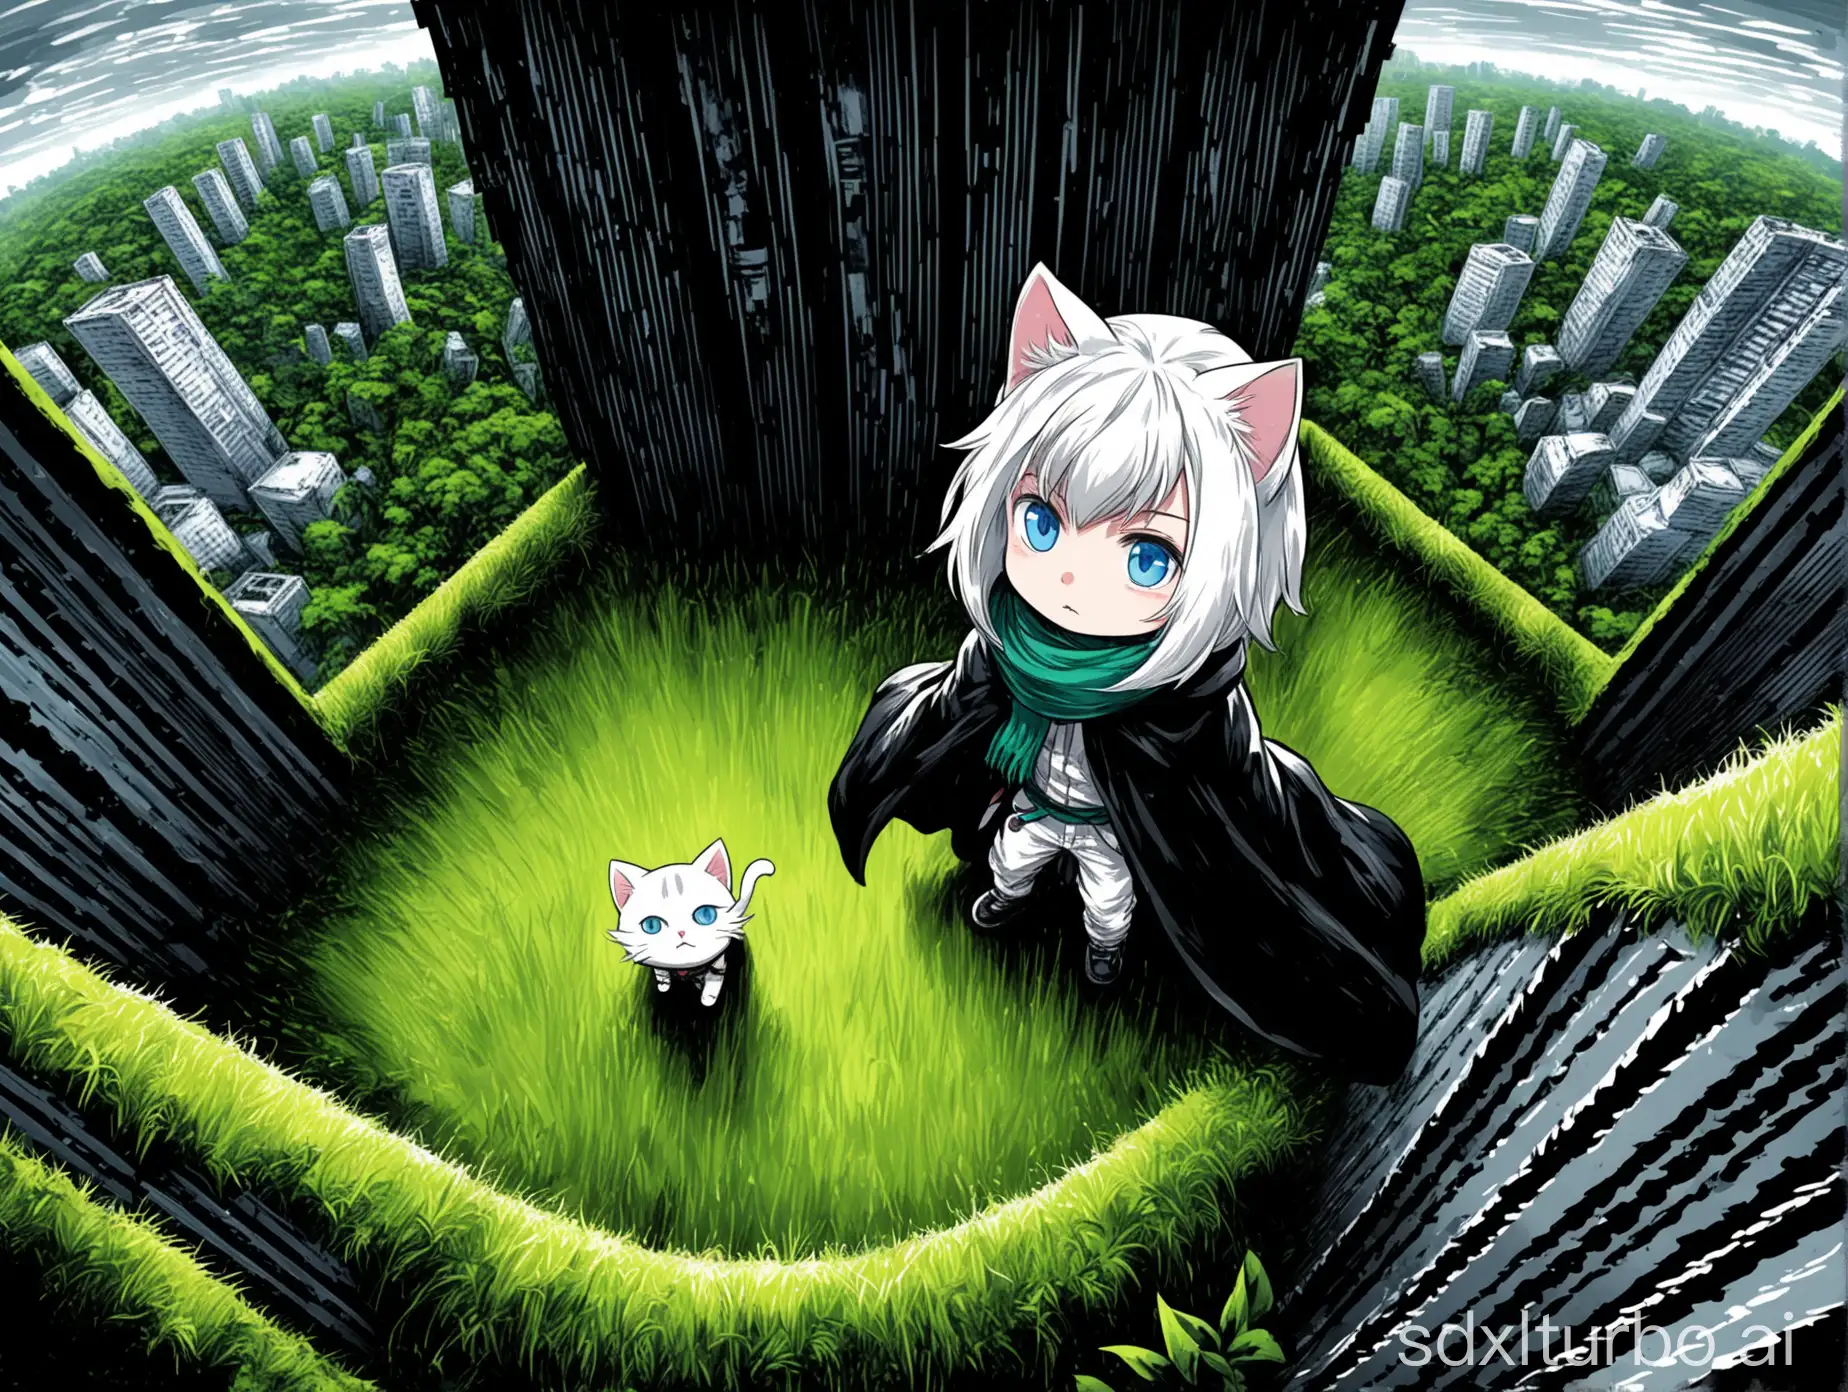 text:NekoboyAI, strong_concept_art_Style, strong_contrast between black and white, oil_painting_strokes, comics, A boy chibi, black coat, cloak, and hat, blue eyes, with white hair, cat ears, cat tails, Green scarf, 360-degree perspective, depth background, ups and downs, wide-angle lens, top-down perspective, rooftop of high-rise building, looking down, surrounded by grass, trees, jungle, Standing in the abyss, the deepest part, the figure on the left, text:NekoboyAI, background text:NekoboyAI